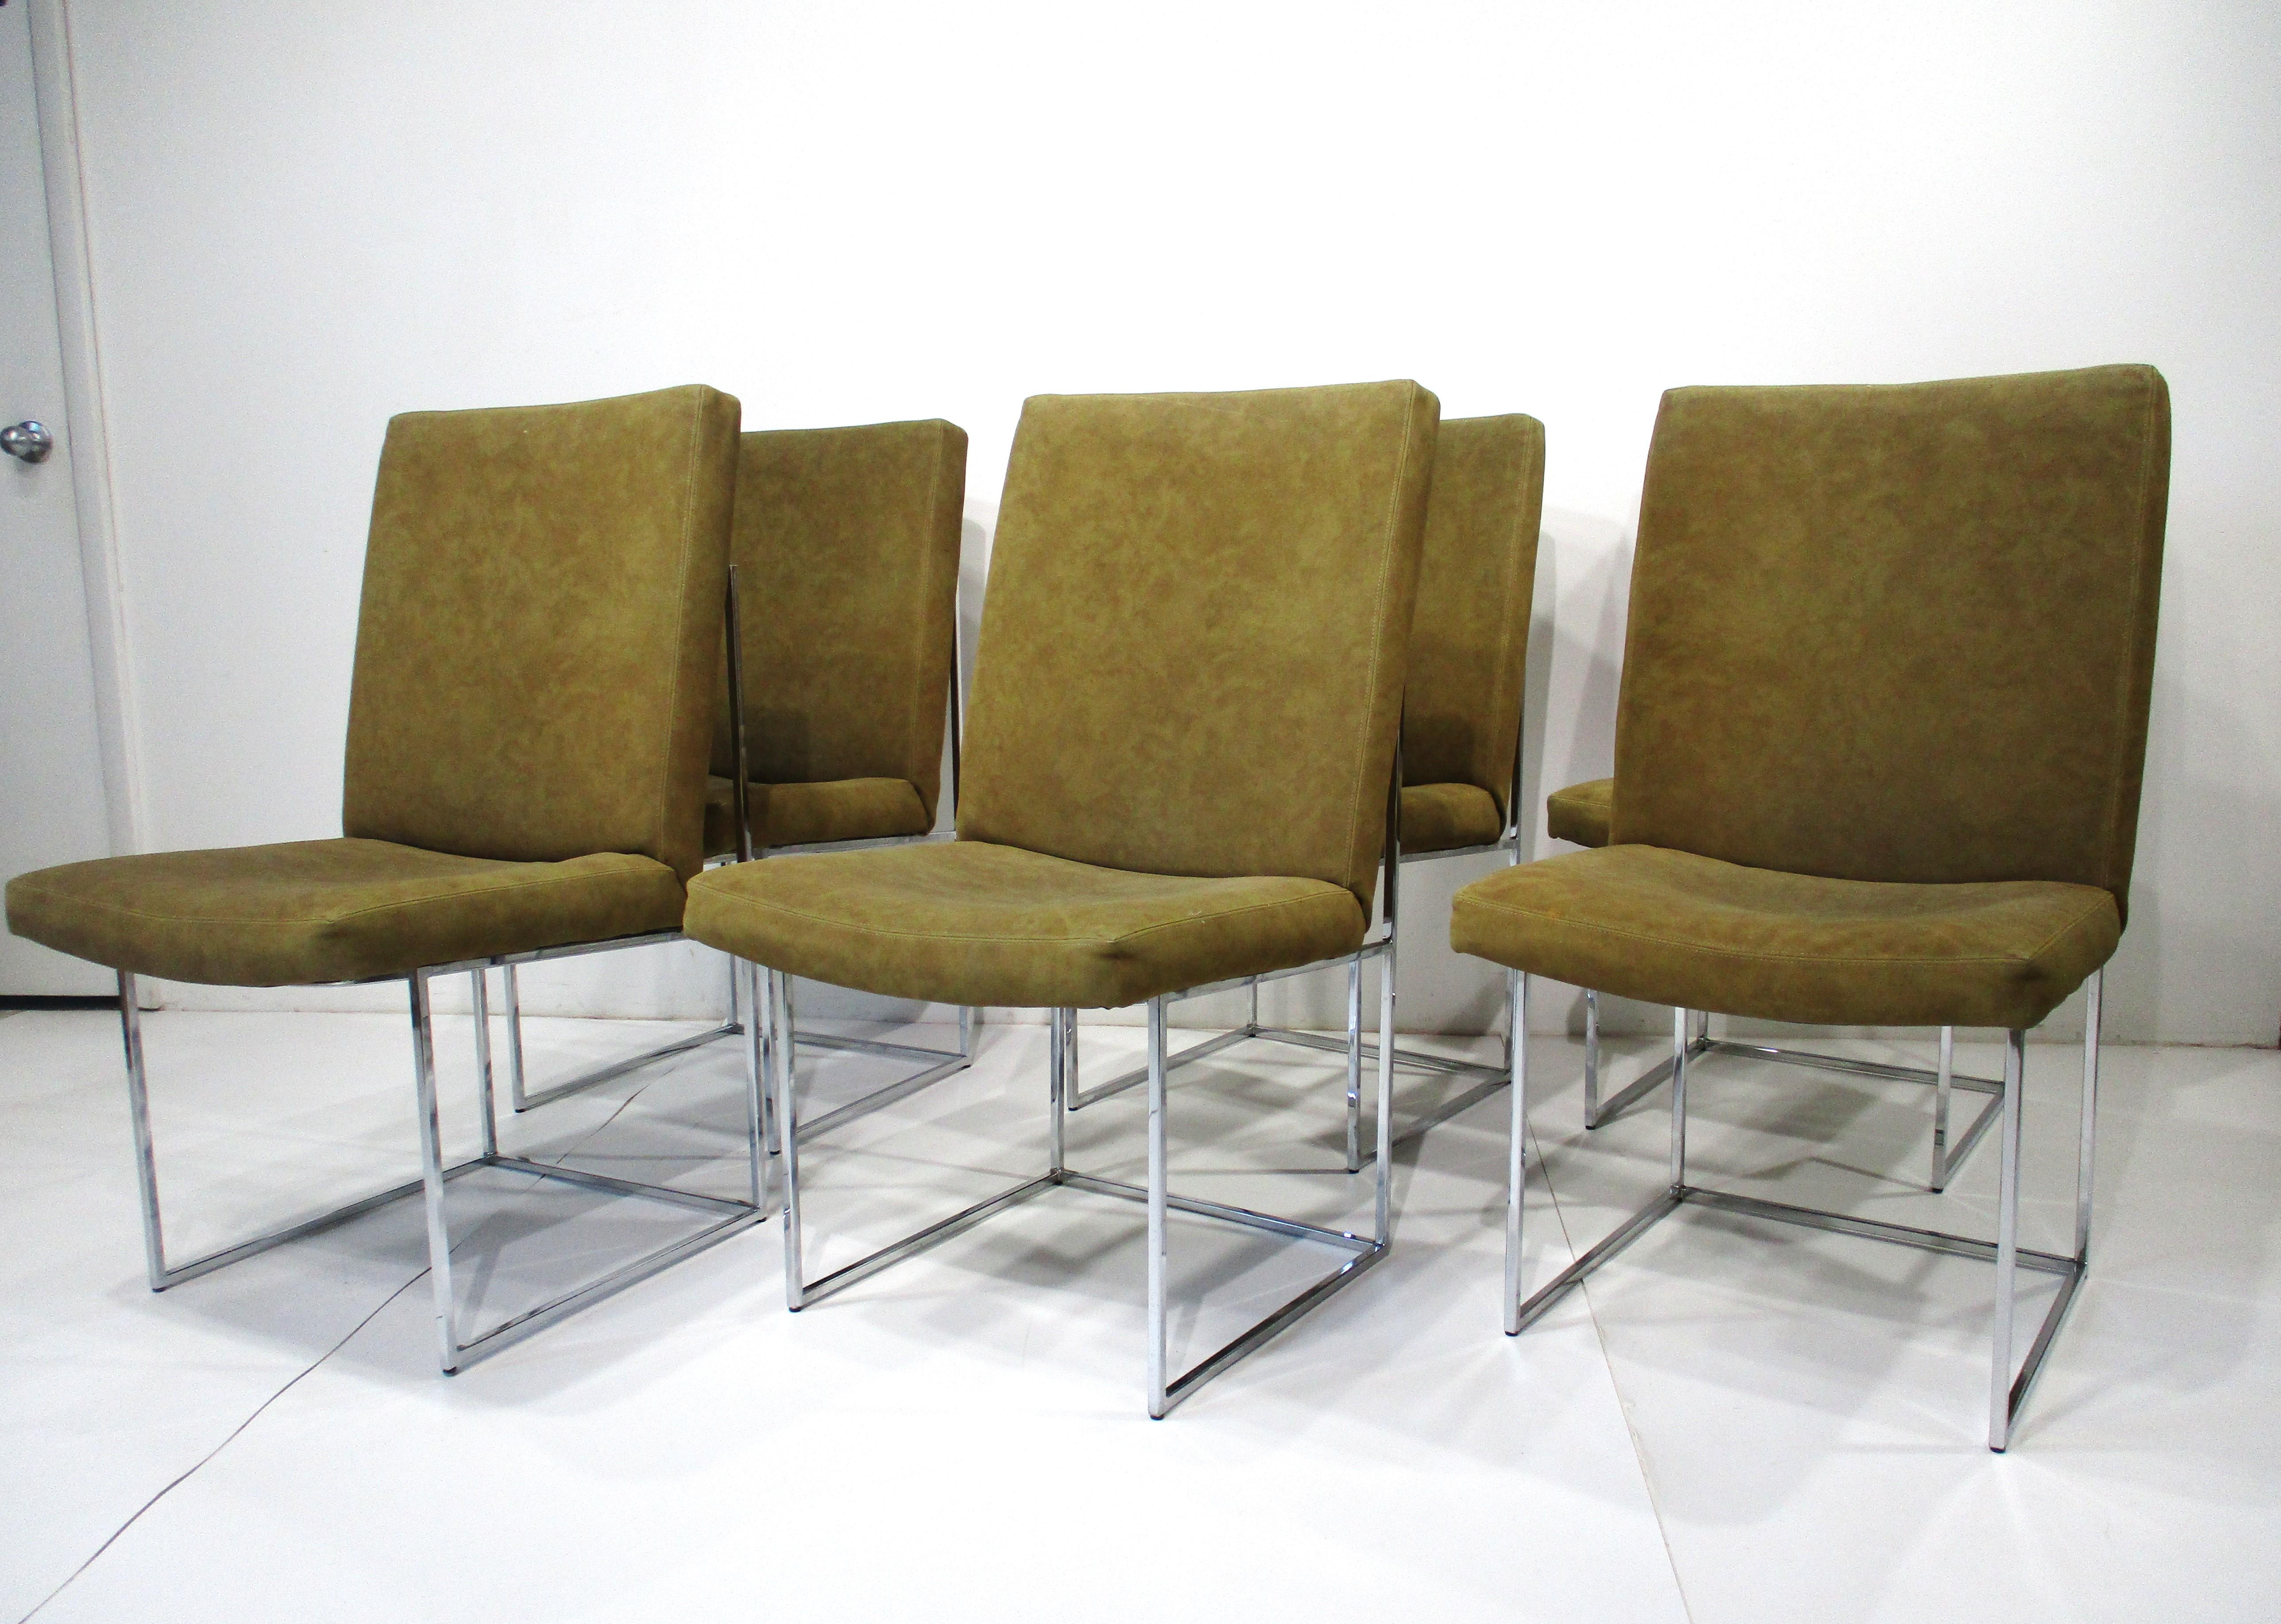 A set of six chrome squared tubed framed higher backed dining chairs in a dark tan ultra suede by designer Milo Baughman . Giving plenty of comfort with the taller backs and with a form that's able to fitting into many different styles and interiors